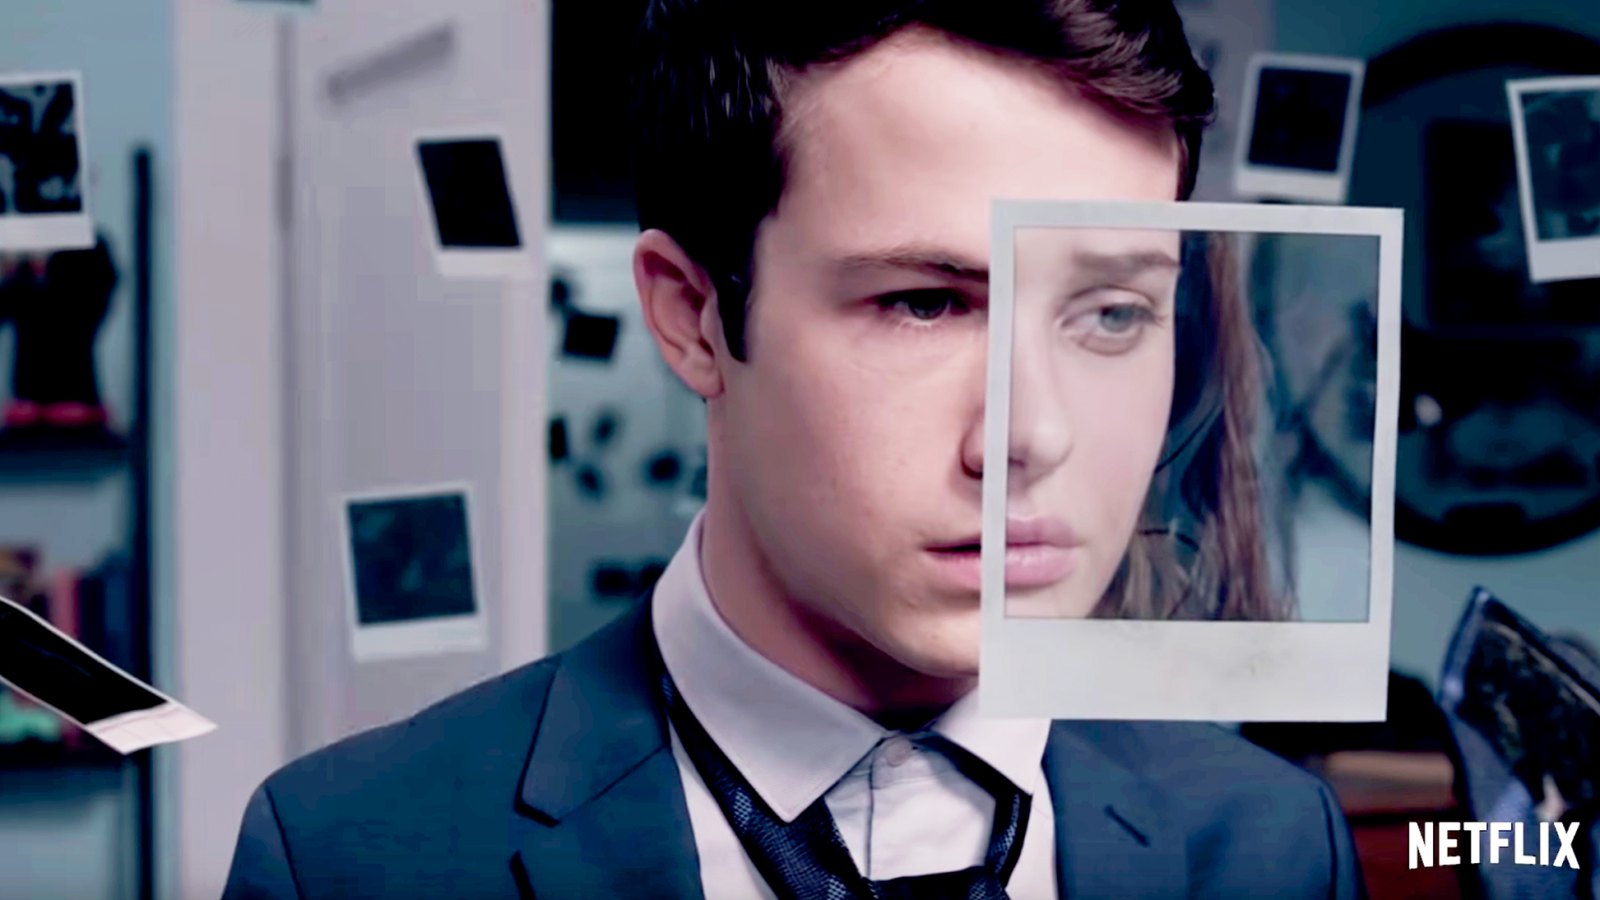 '13 Reasons Why' star Dylan Minnette